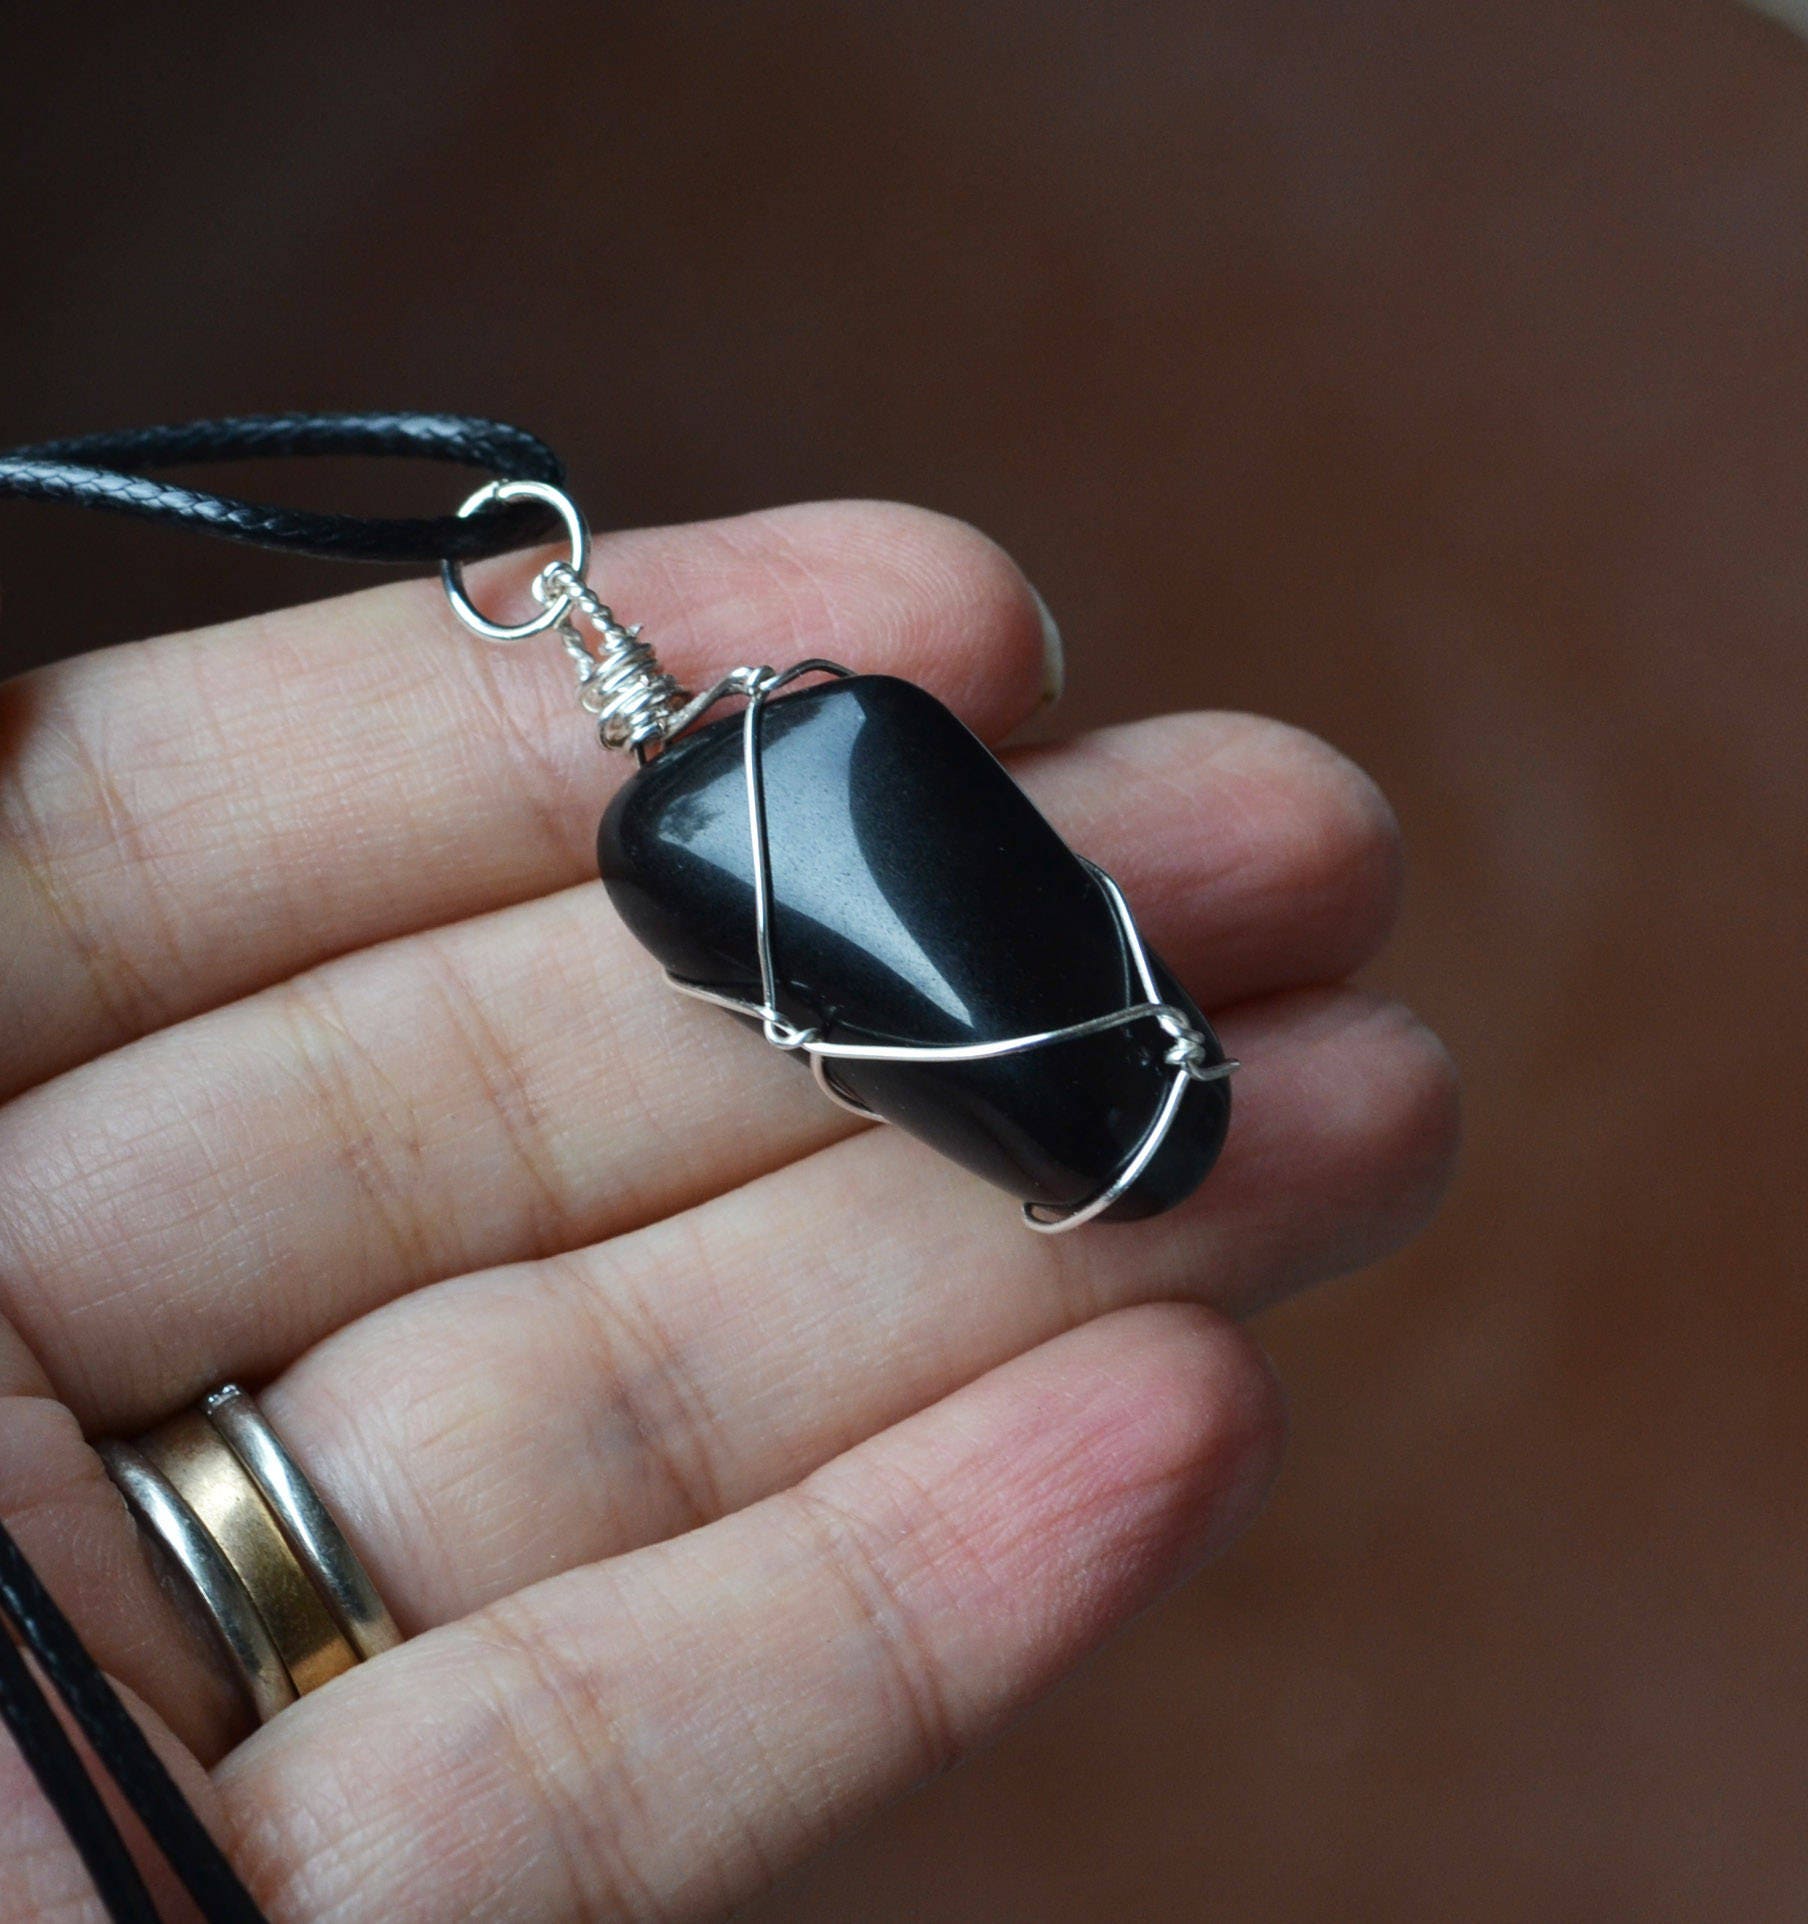 black obsidian necklace for protection